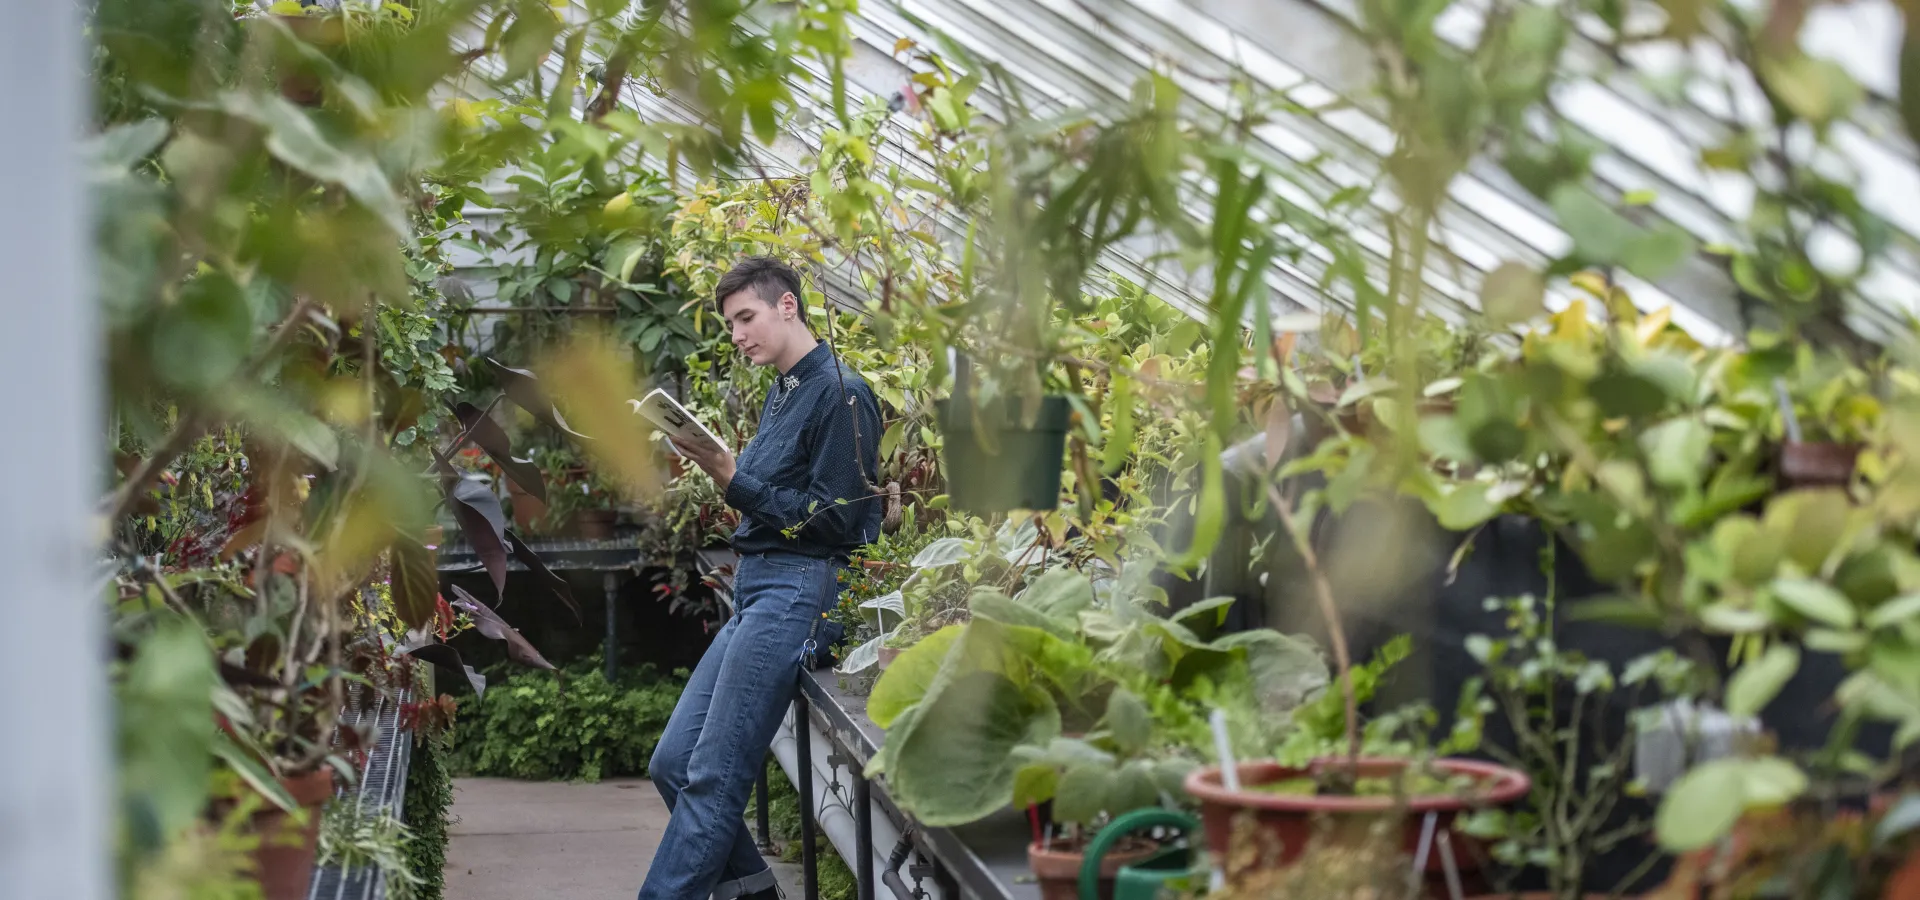 A student in the greenhouse, reading a book.